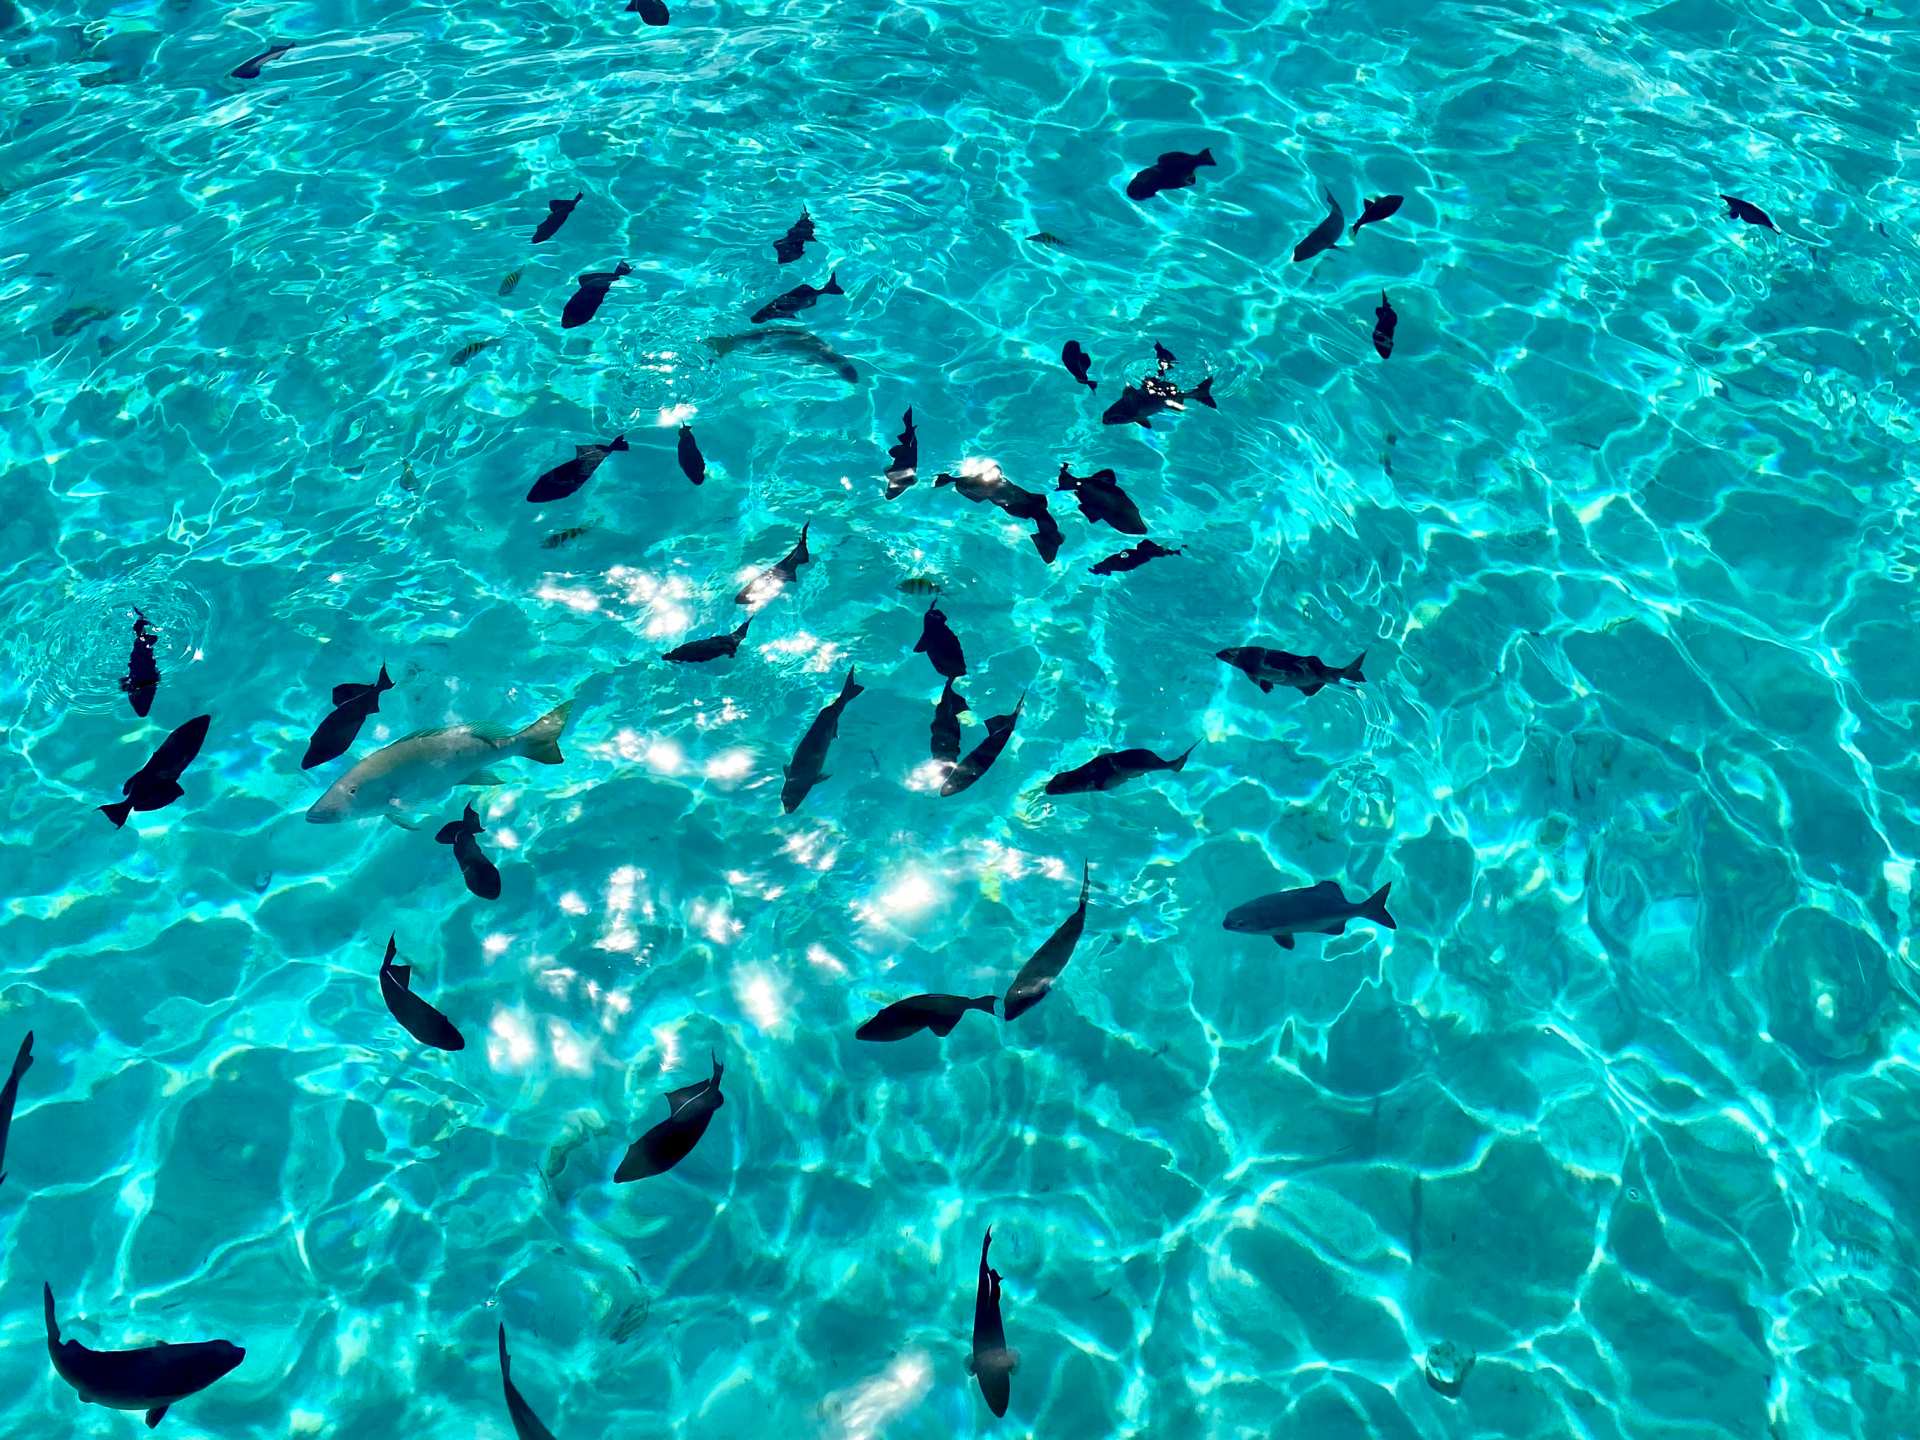 Fish swimming in the Cayman Islands